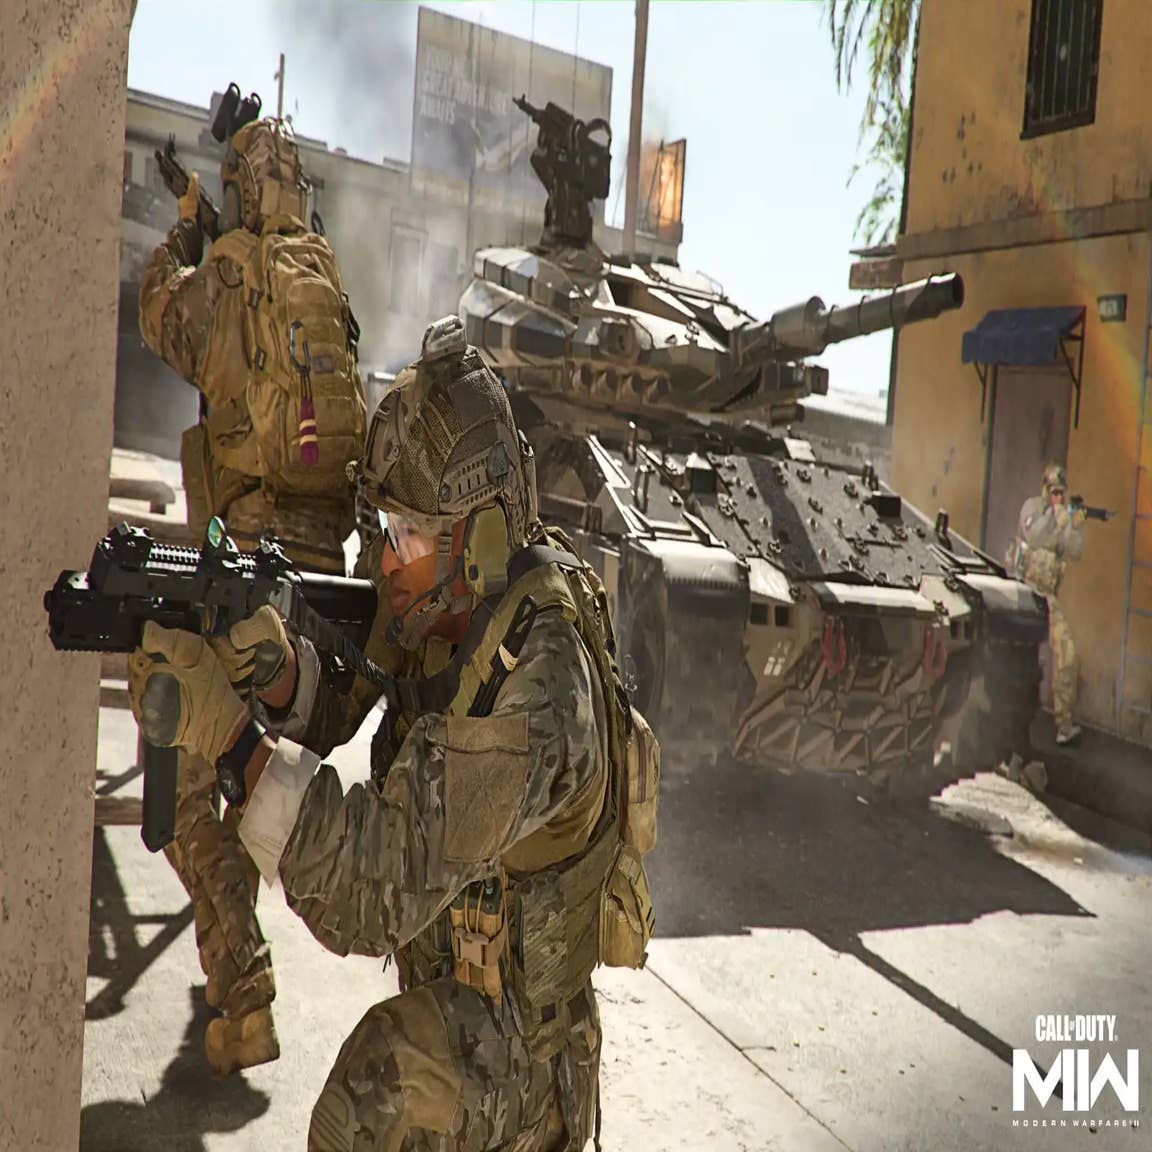 Call of Duty Dev Discusses the Reasons Why Advanced Warfare 2 Was